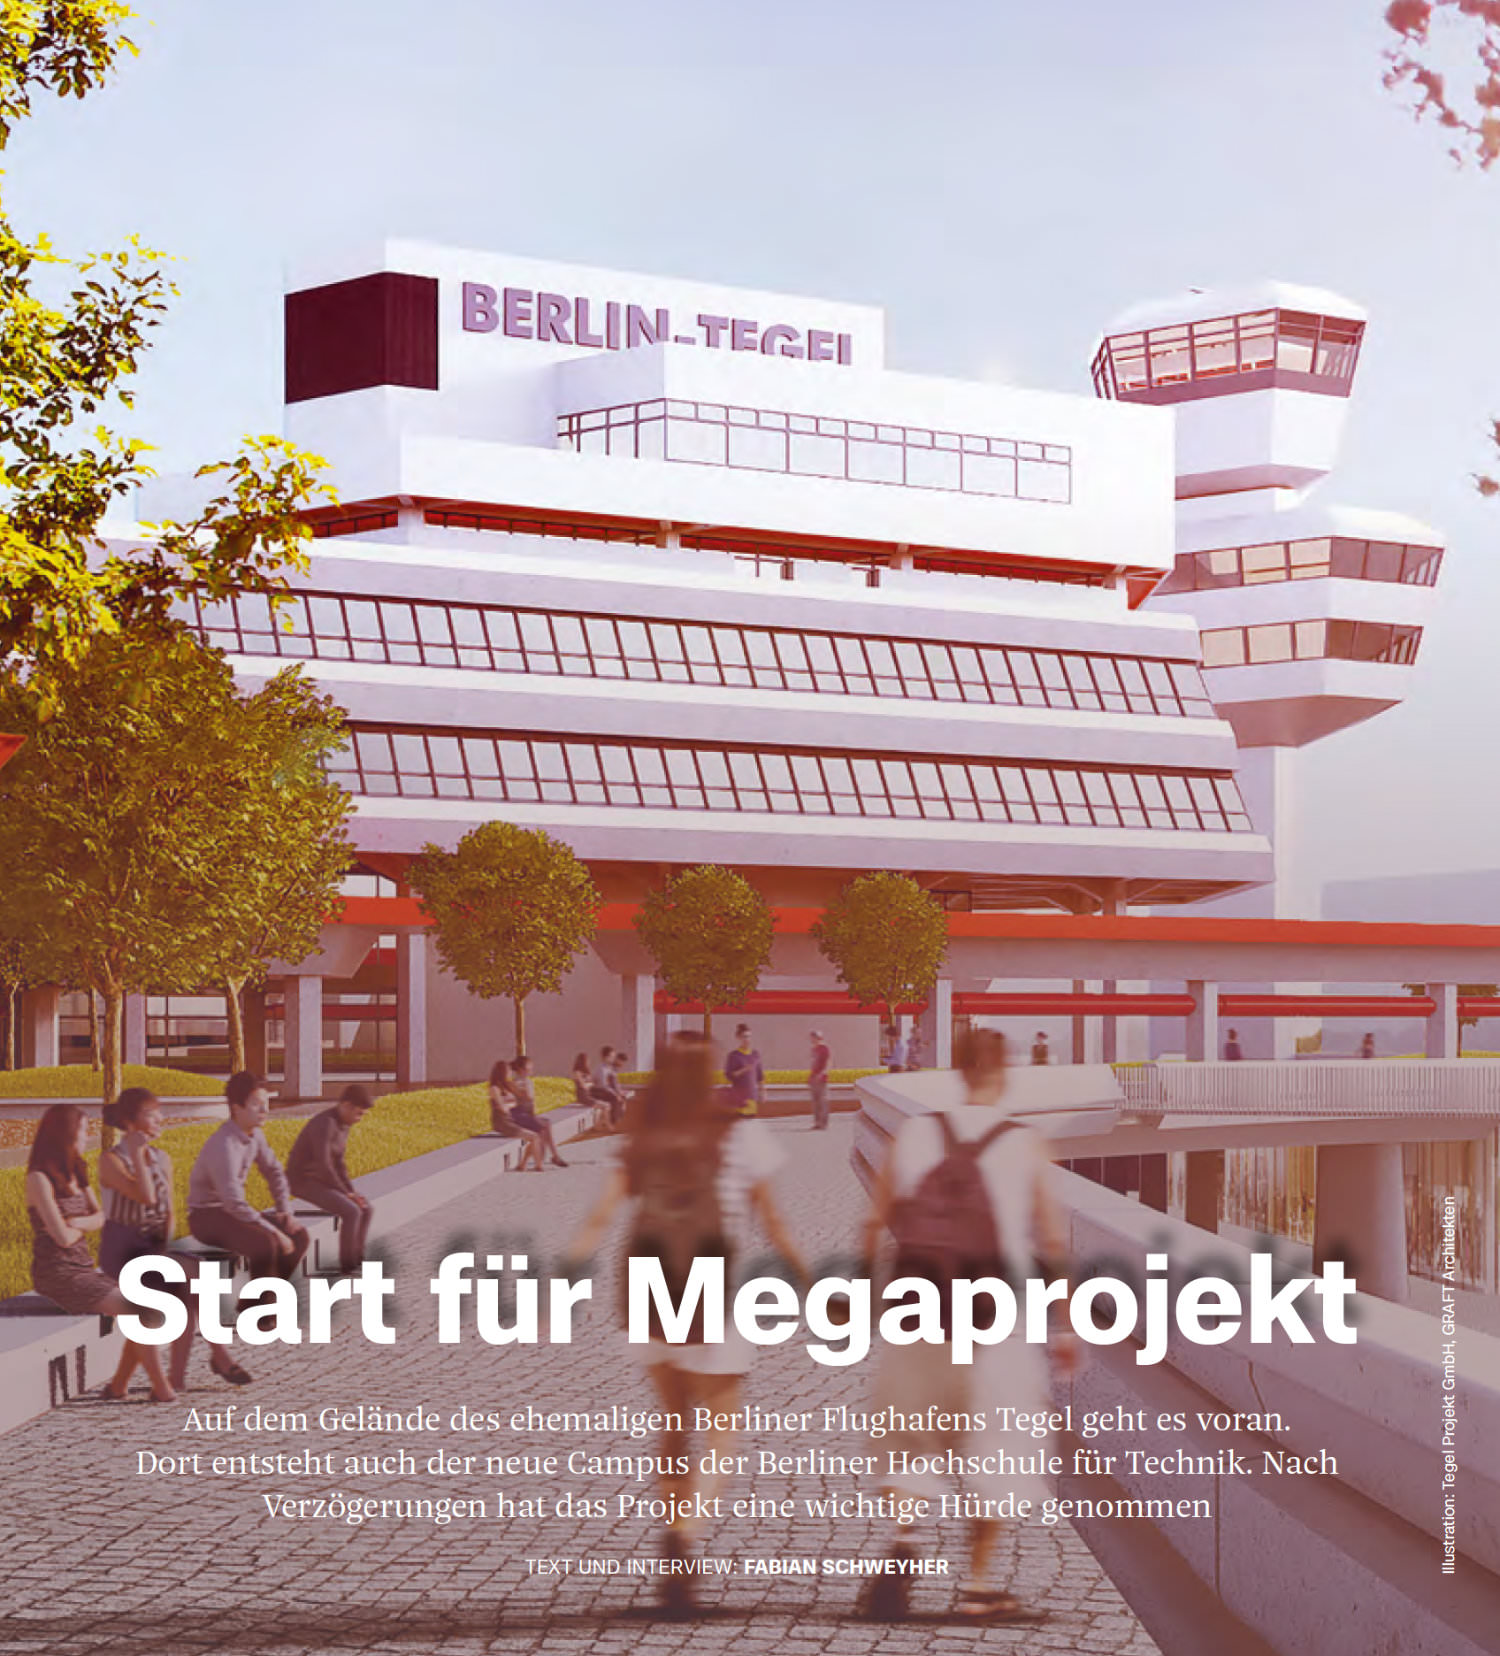 Fonts in Use: Typefaces Case and Nice Text for the new corporate design of the Berliner Hochschule für Technik (university magazine)